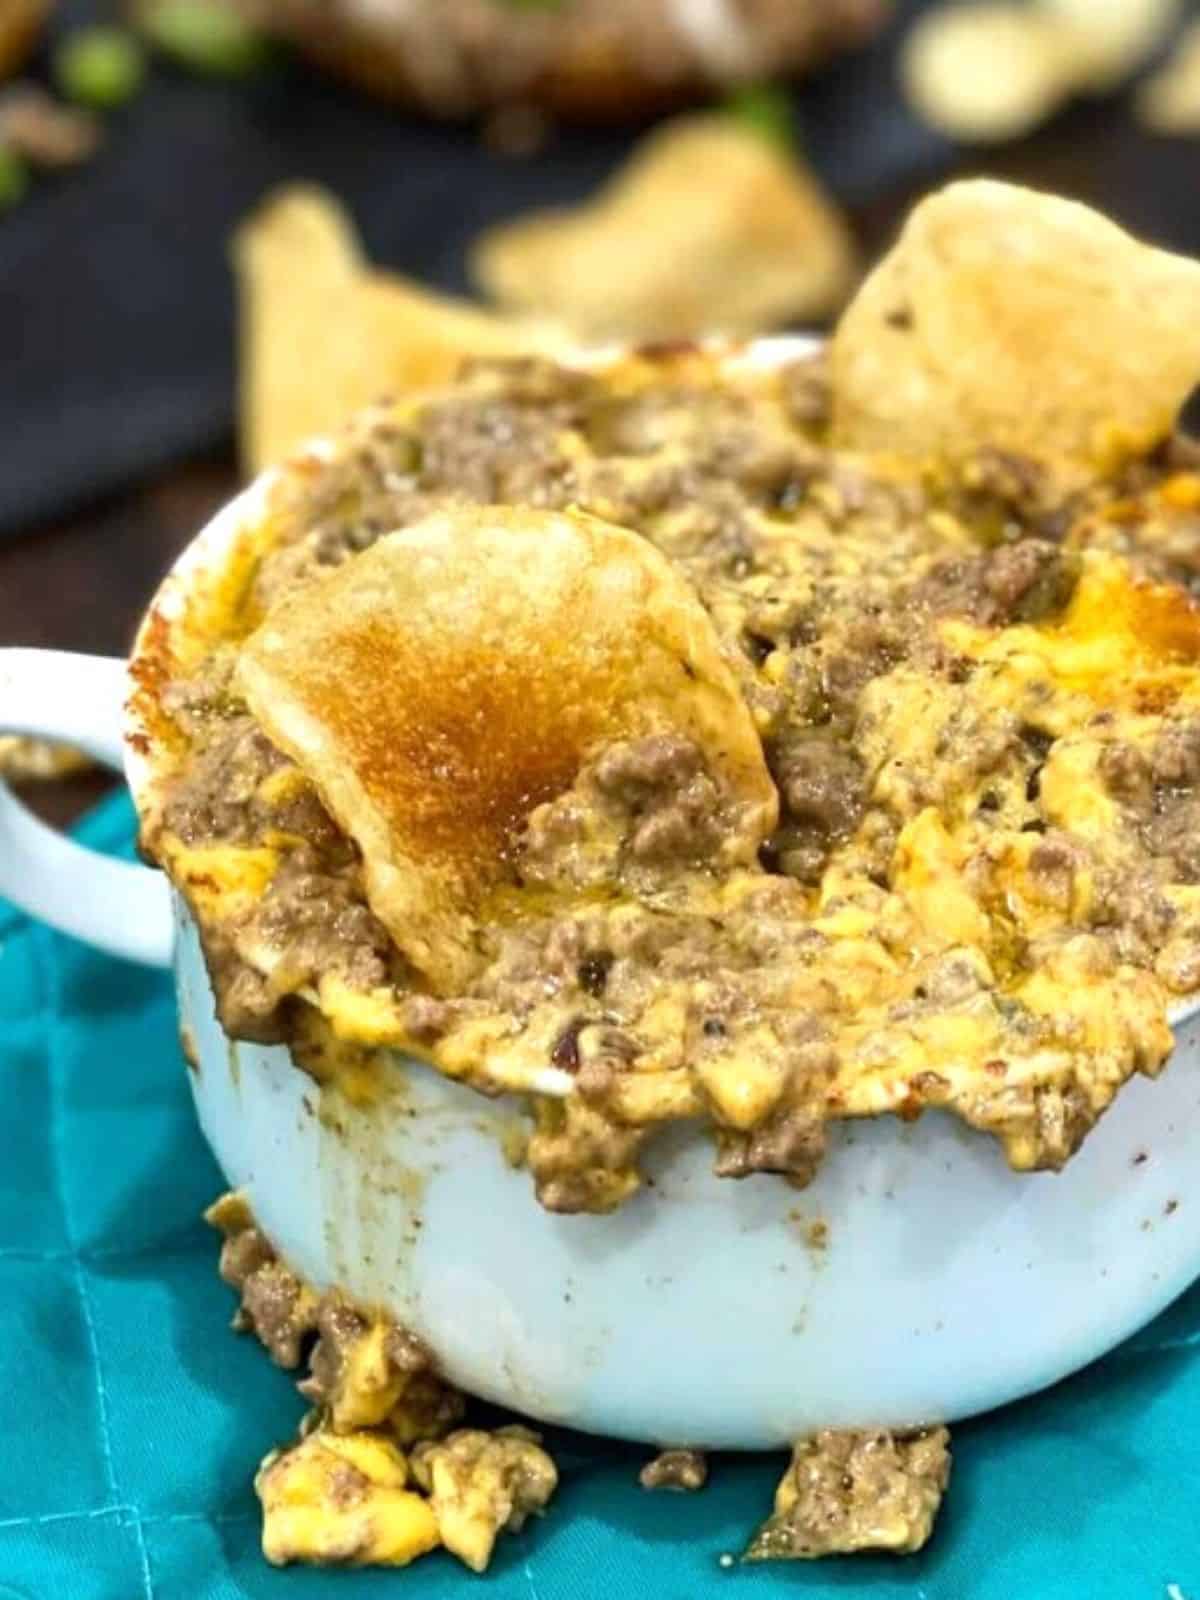 Philly Cheese Steak Dip served in a white cup with potato chips.